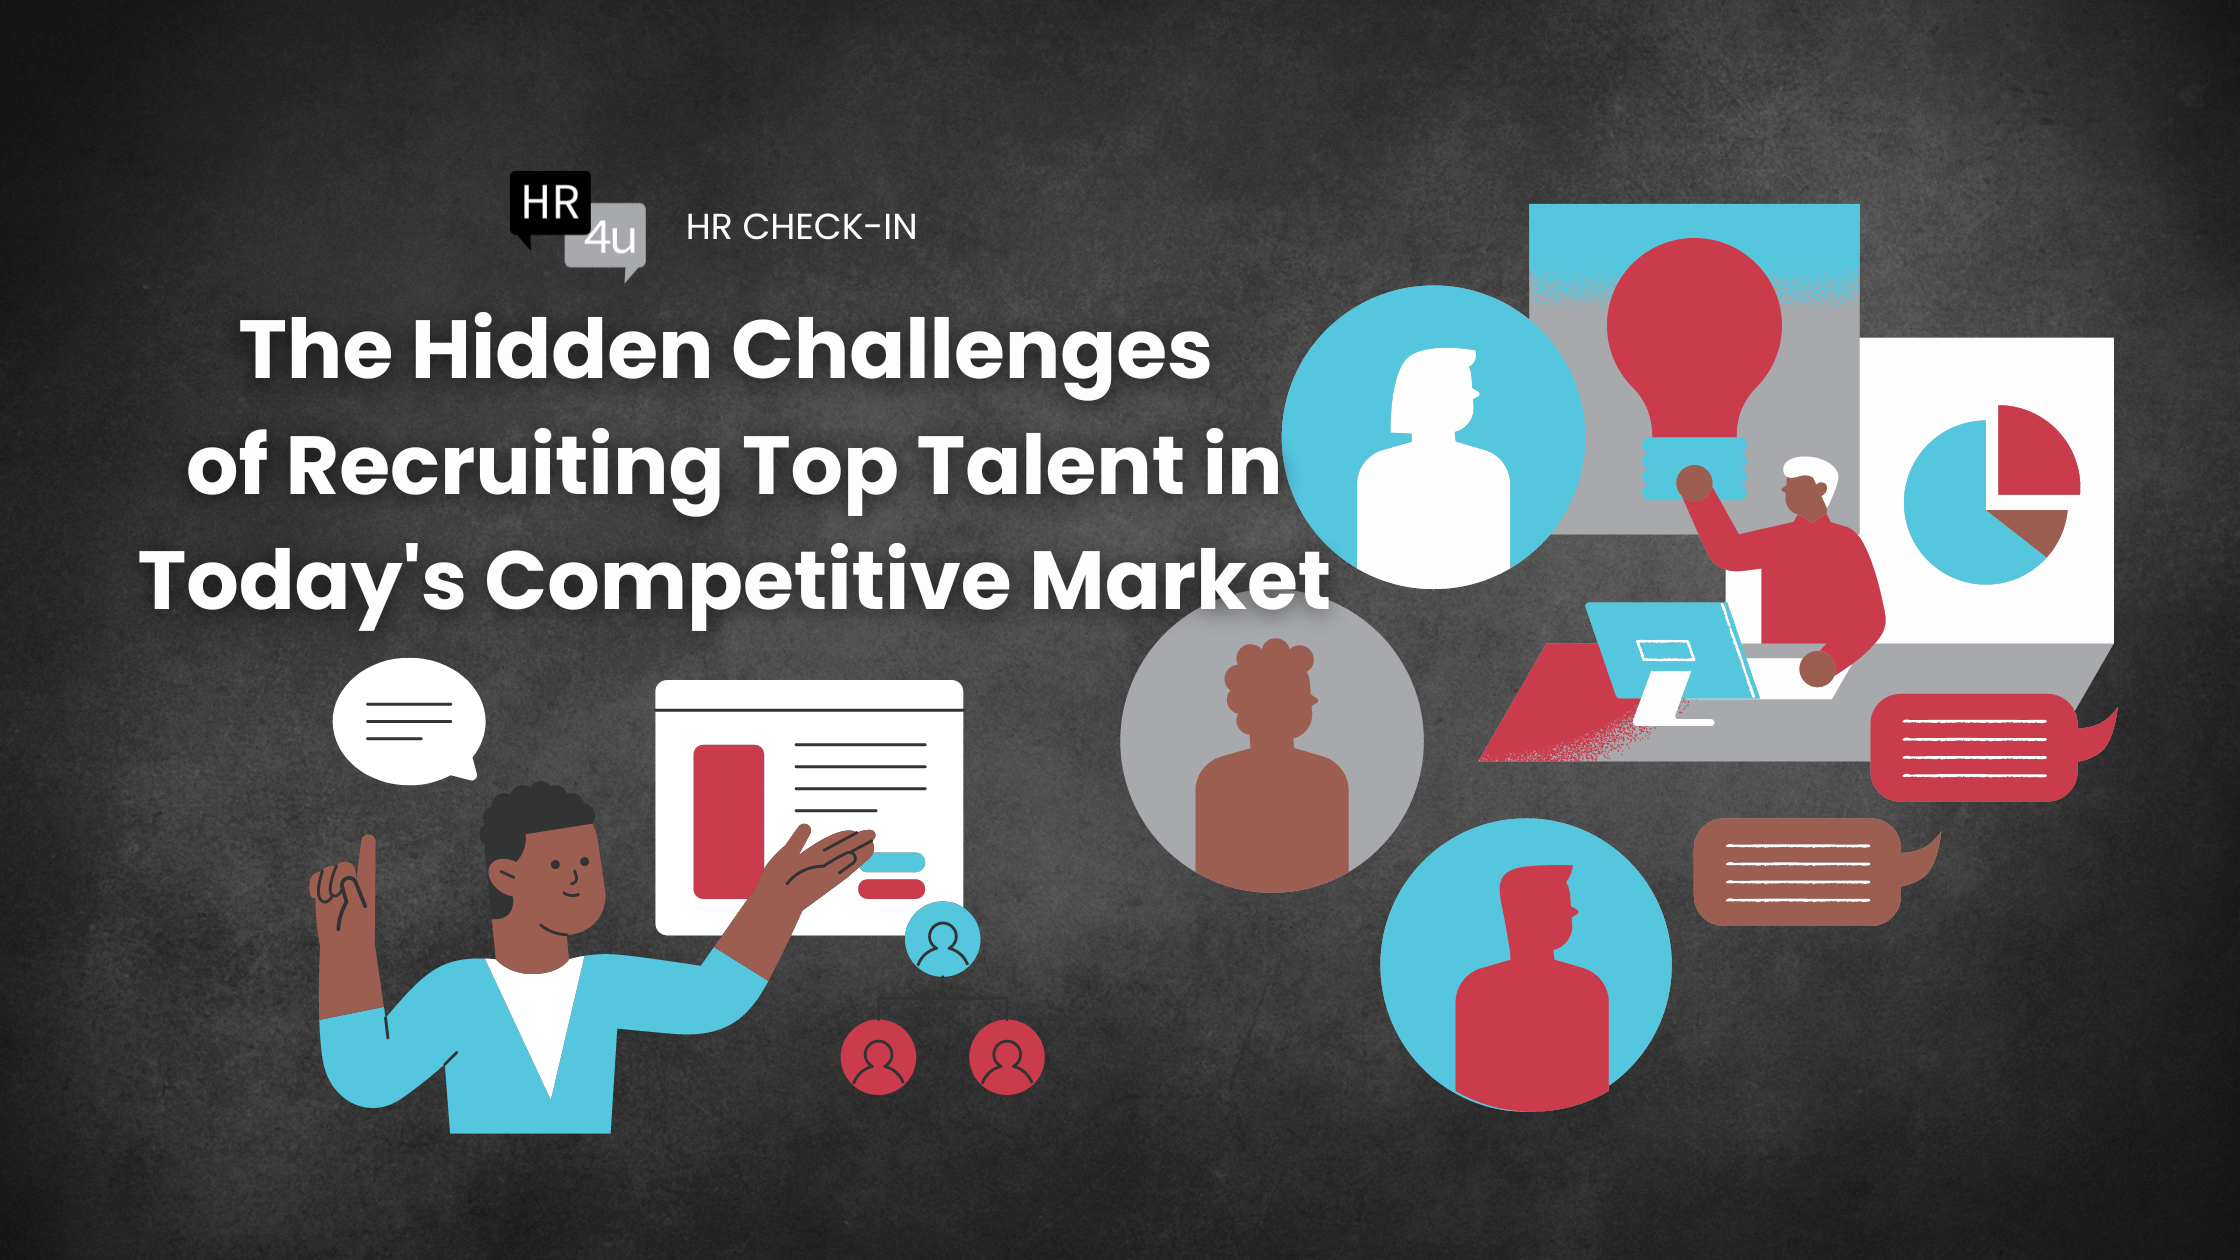 The Hidden Challenges of Recruiting Top Talent in Today’s Competitive Market